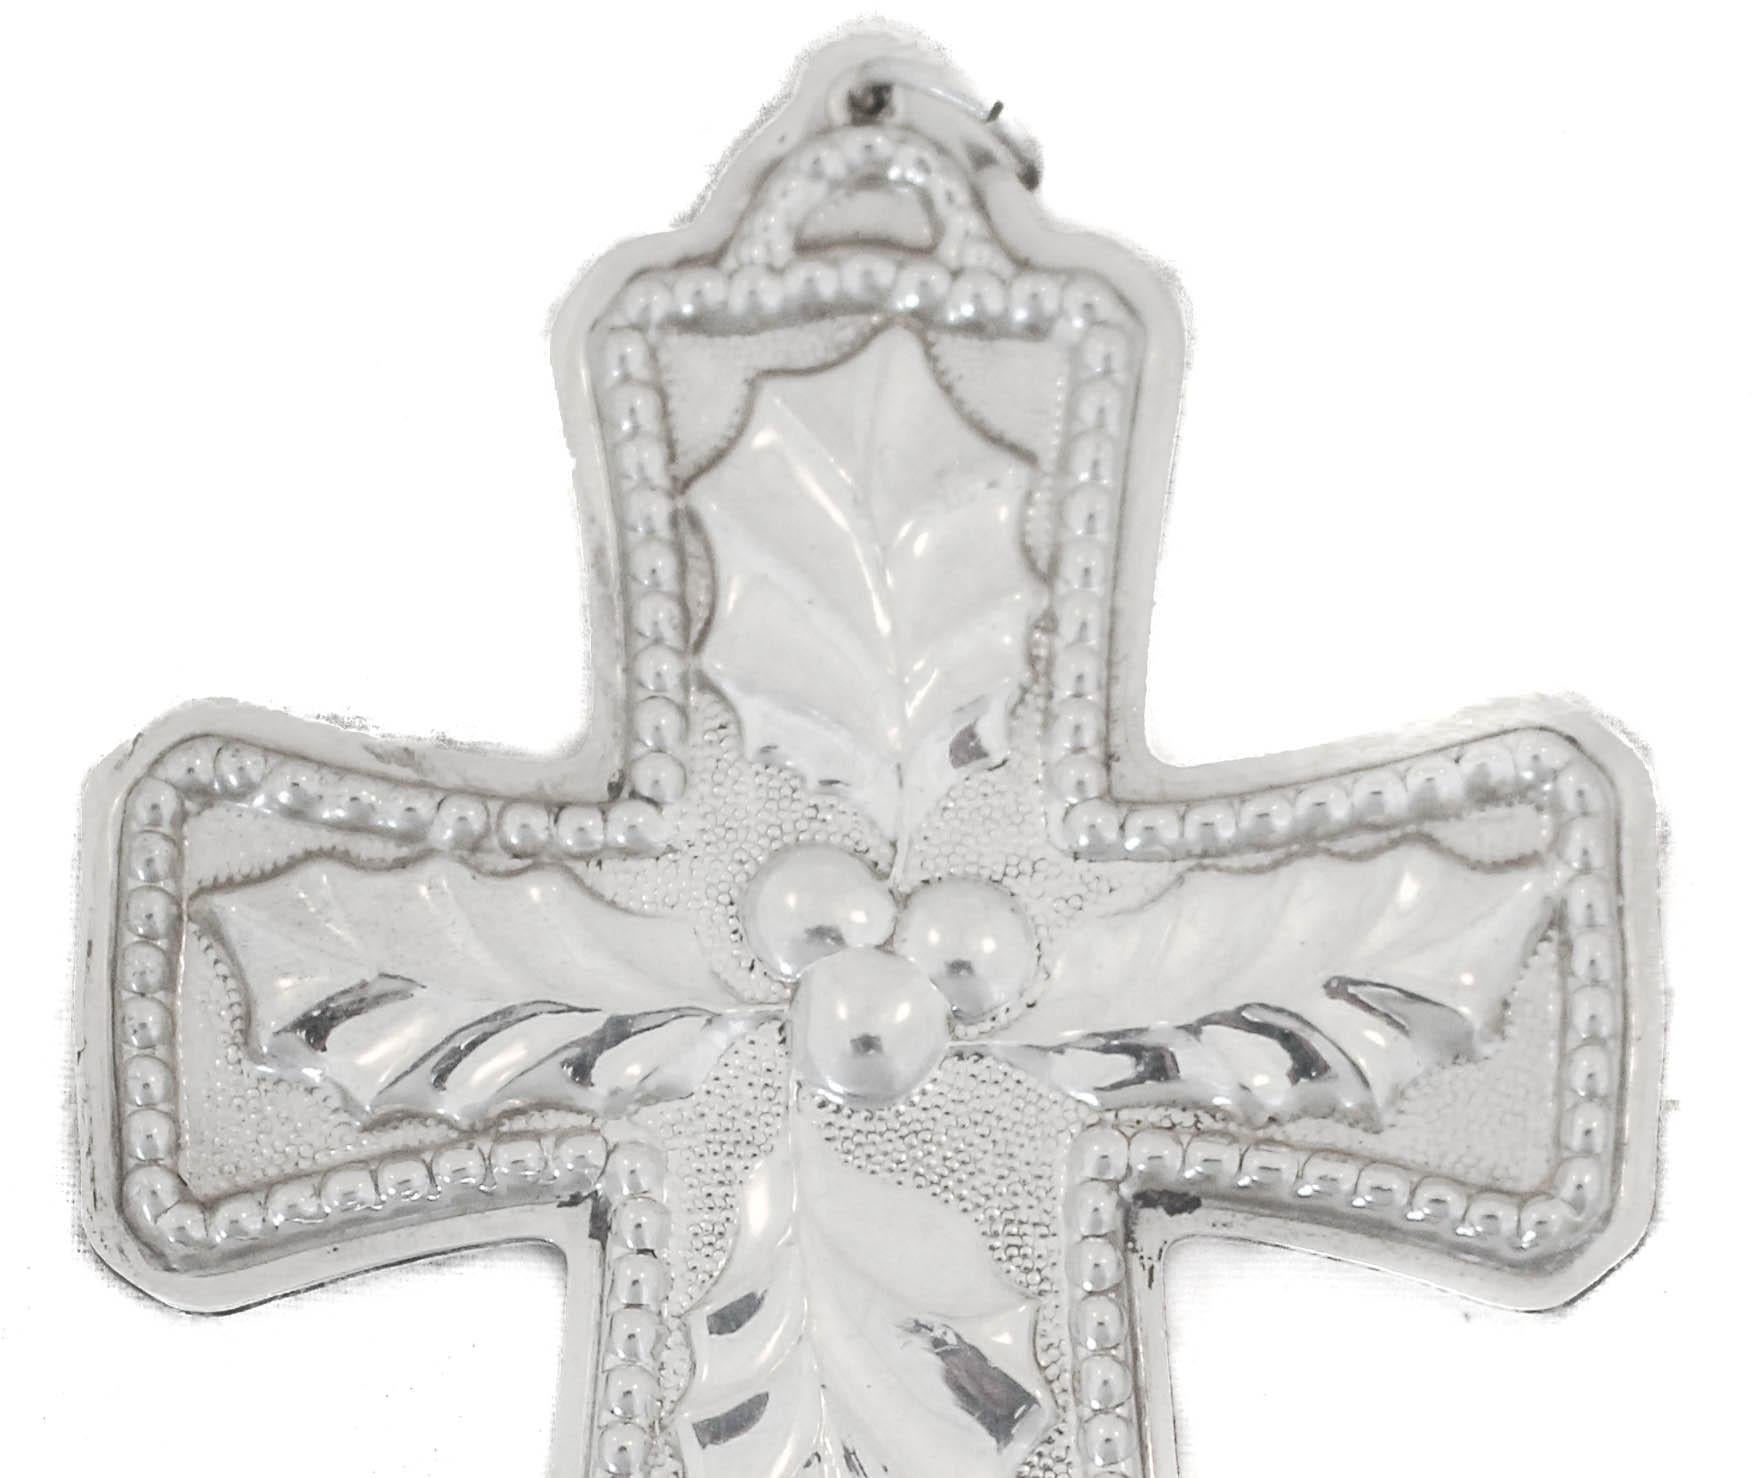 We are happy to offer you this sterling silver Christmas ornament by Tuttle Silversmiths. It’s a cross with Christmas holly and in the center a clump of berries. Such a wonderful and appropriate ornament to decorate your tree and grace your home.